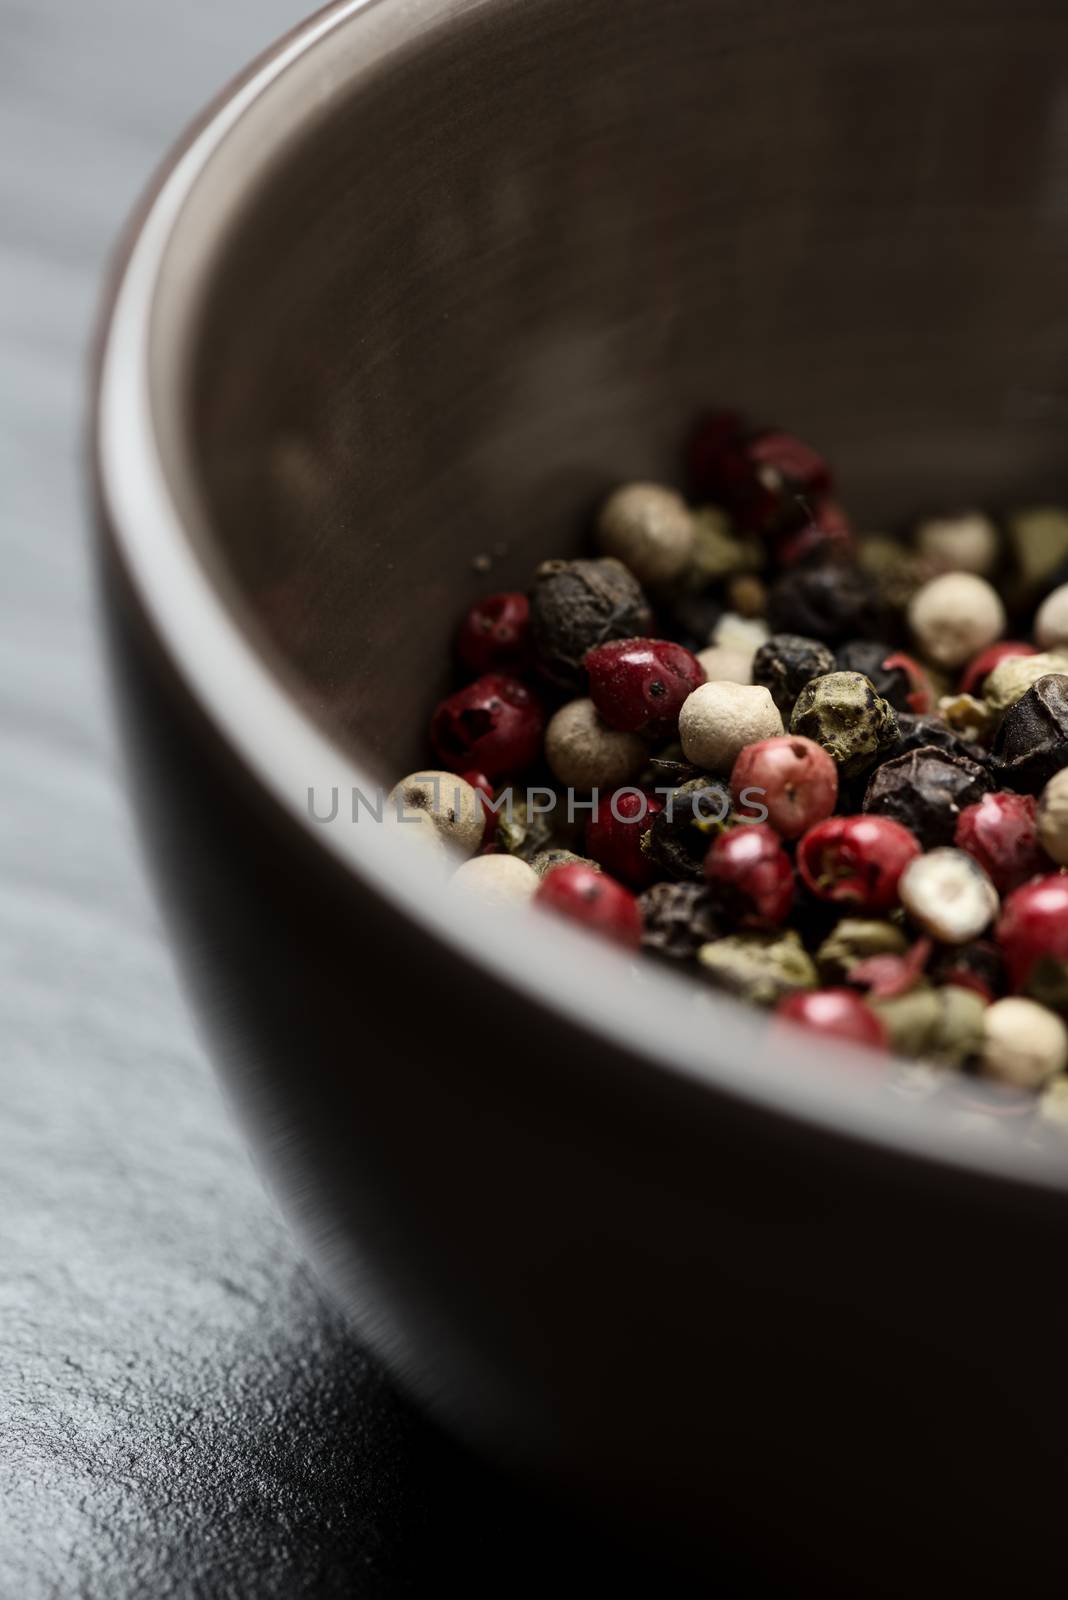 Pepper corn mix in bowl close-up on stone